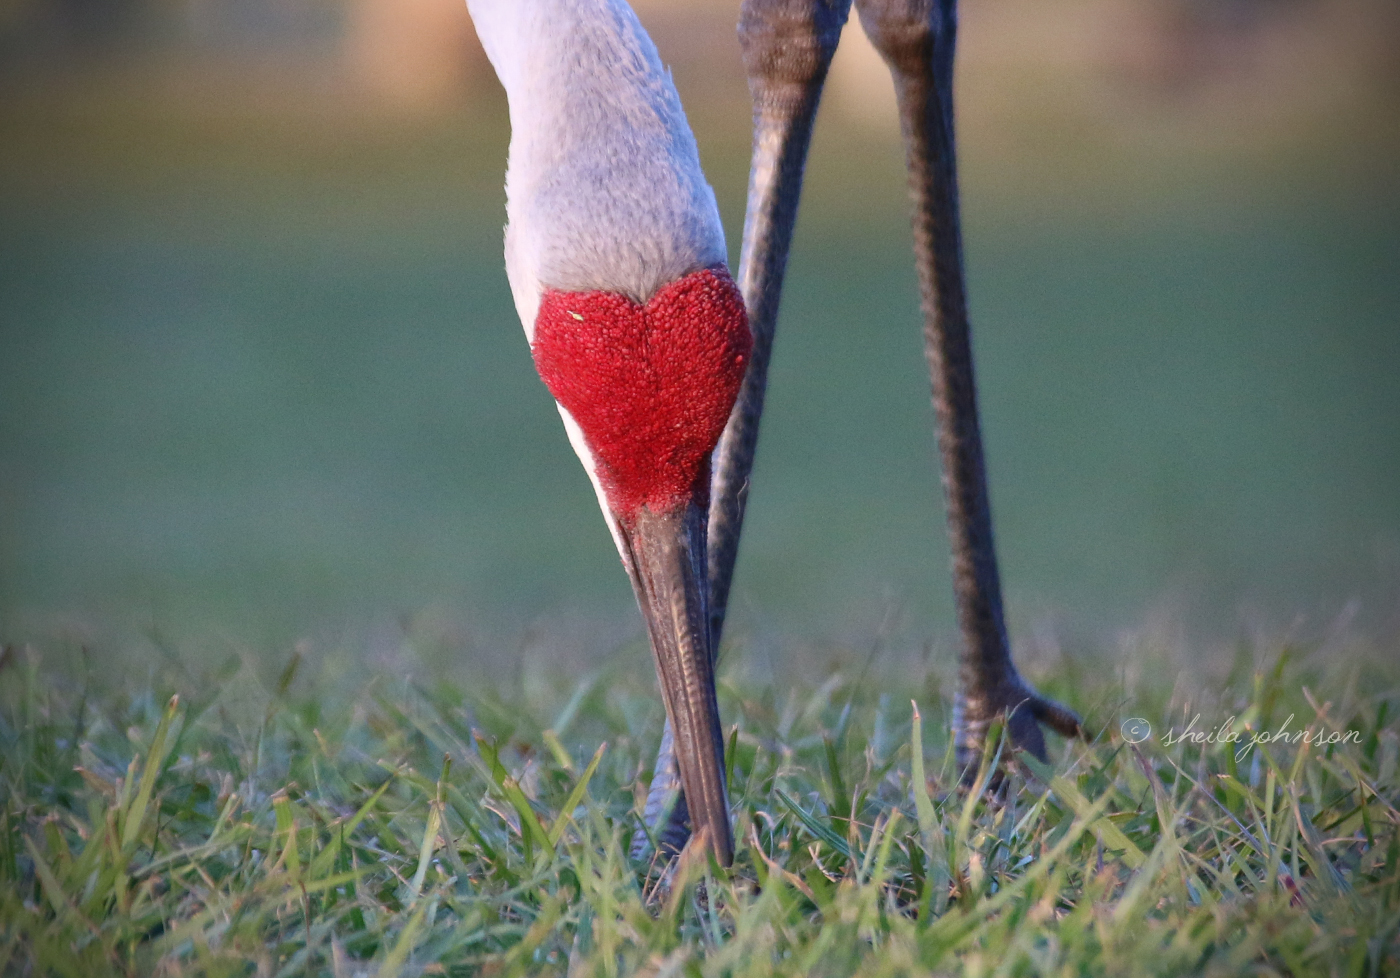 Did You Know That, At Just The Right Angle, The Sandhill Crane's Red Crown And Beak Make A Heart Shape? Such A Pretty Sight!